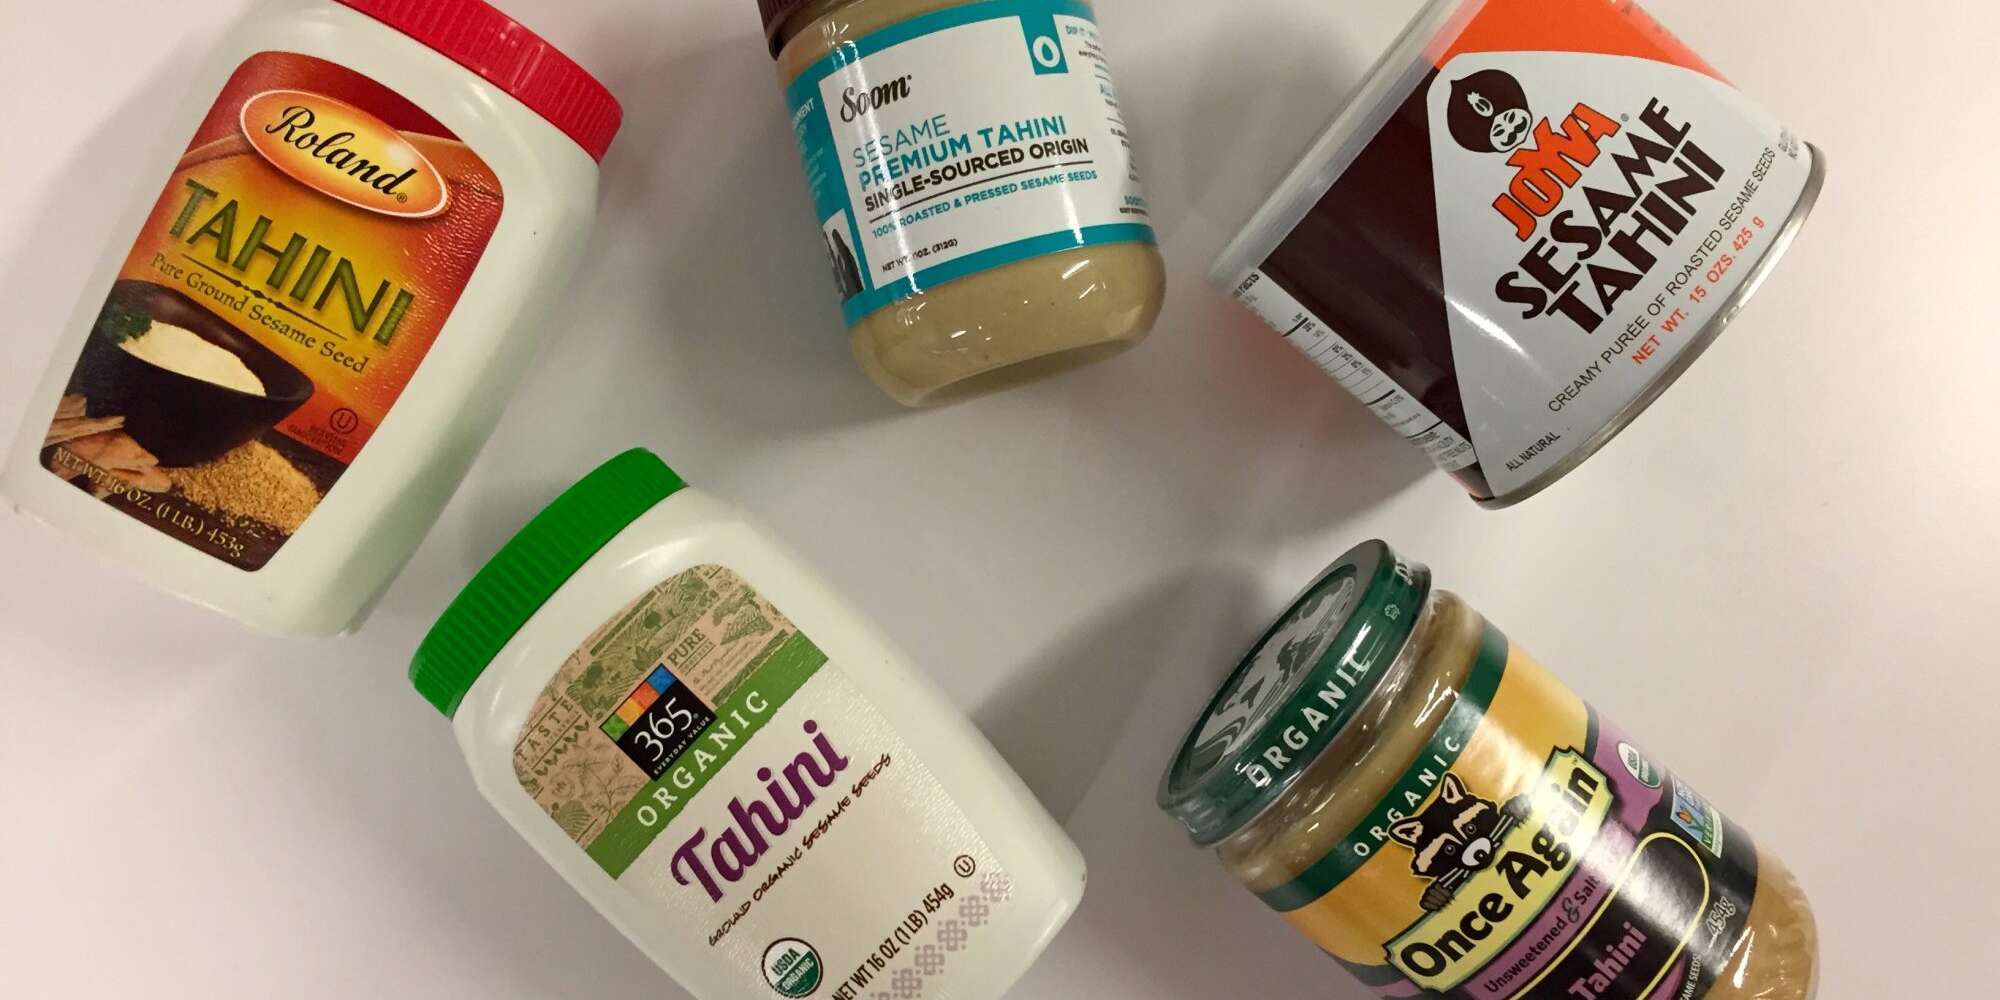 Taste-Off: The best tahini -- and the worst